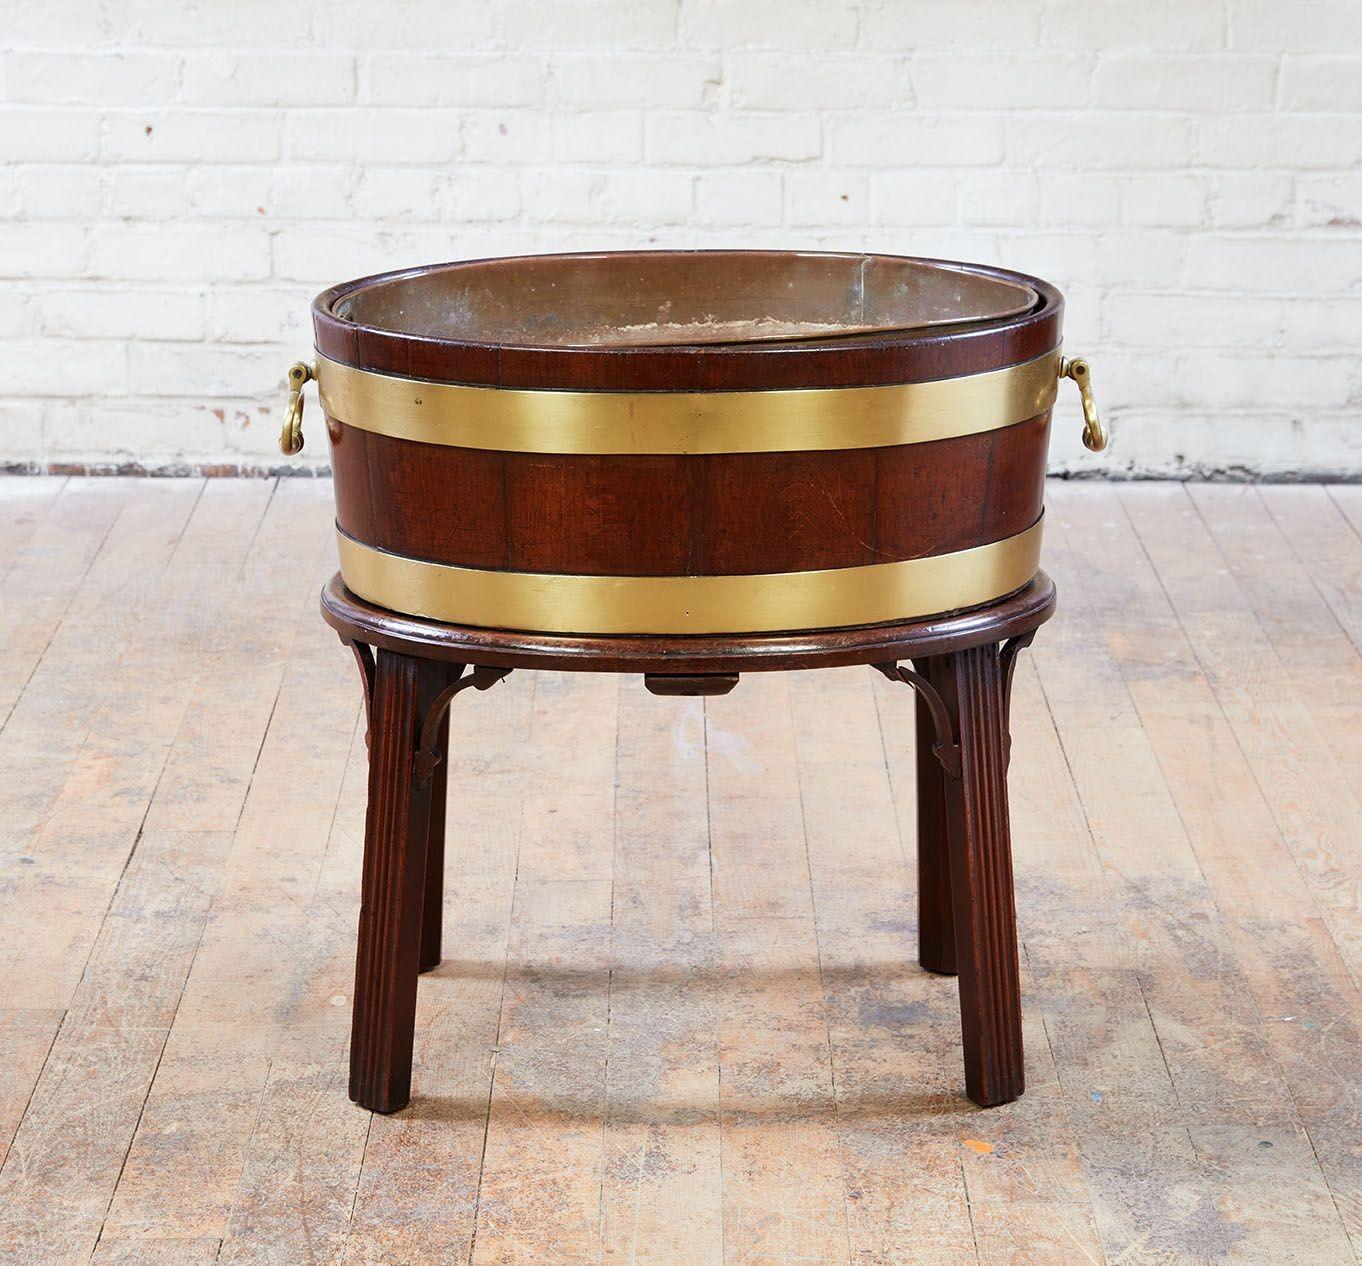 An 18th century English wine cooler on stand, featuring coopered mahogany basin with brass banding and original copper liner.  Well-formed solid brass carrying handles.  All on mahogany stand with slightly splayed legs and fretwork corner brackets. 